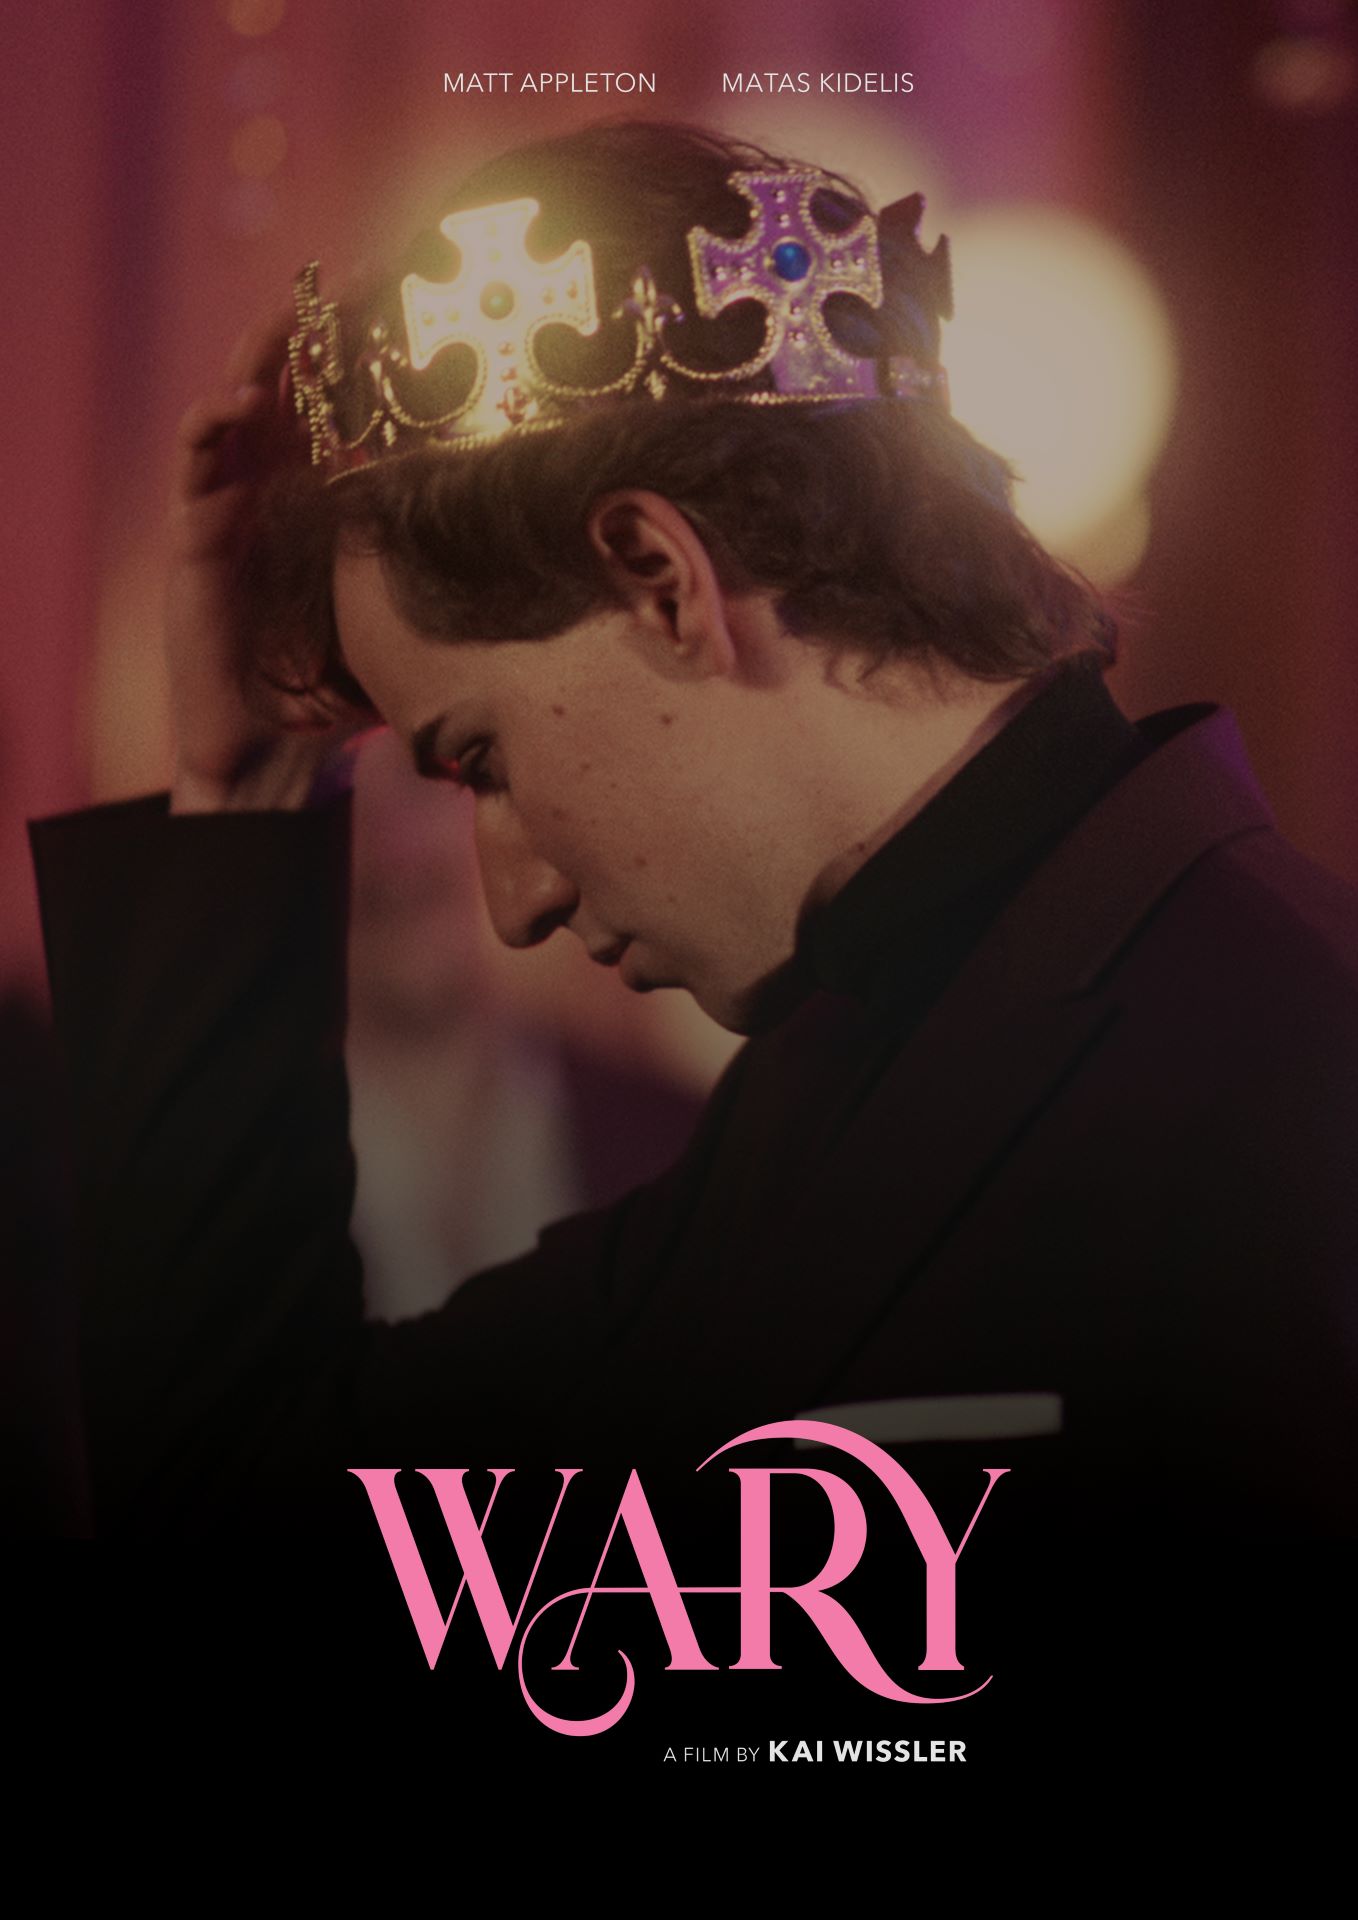 Main cover for the lgbtq+ short film 'Wary' a film written and directed by Kai Wissler